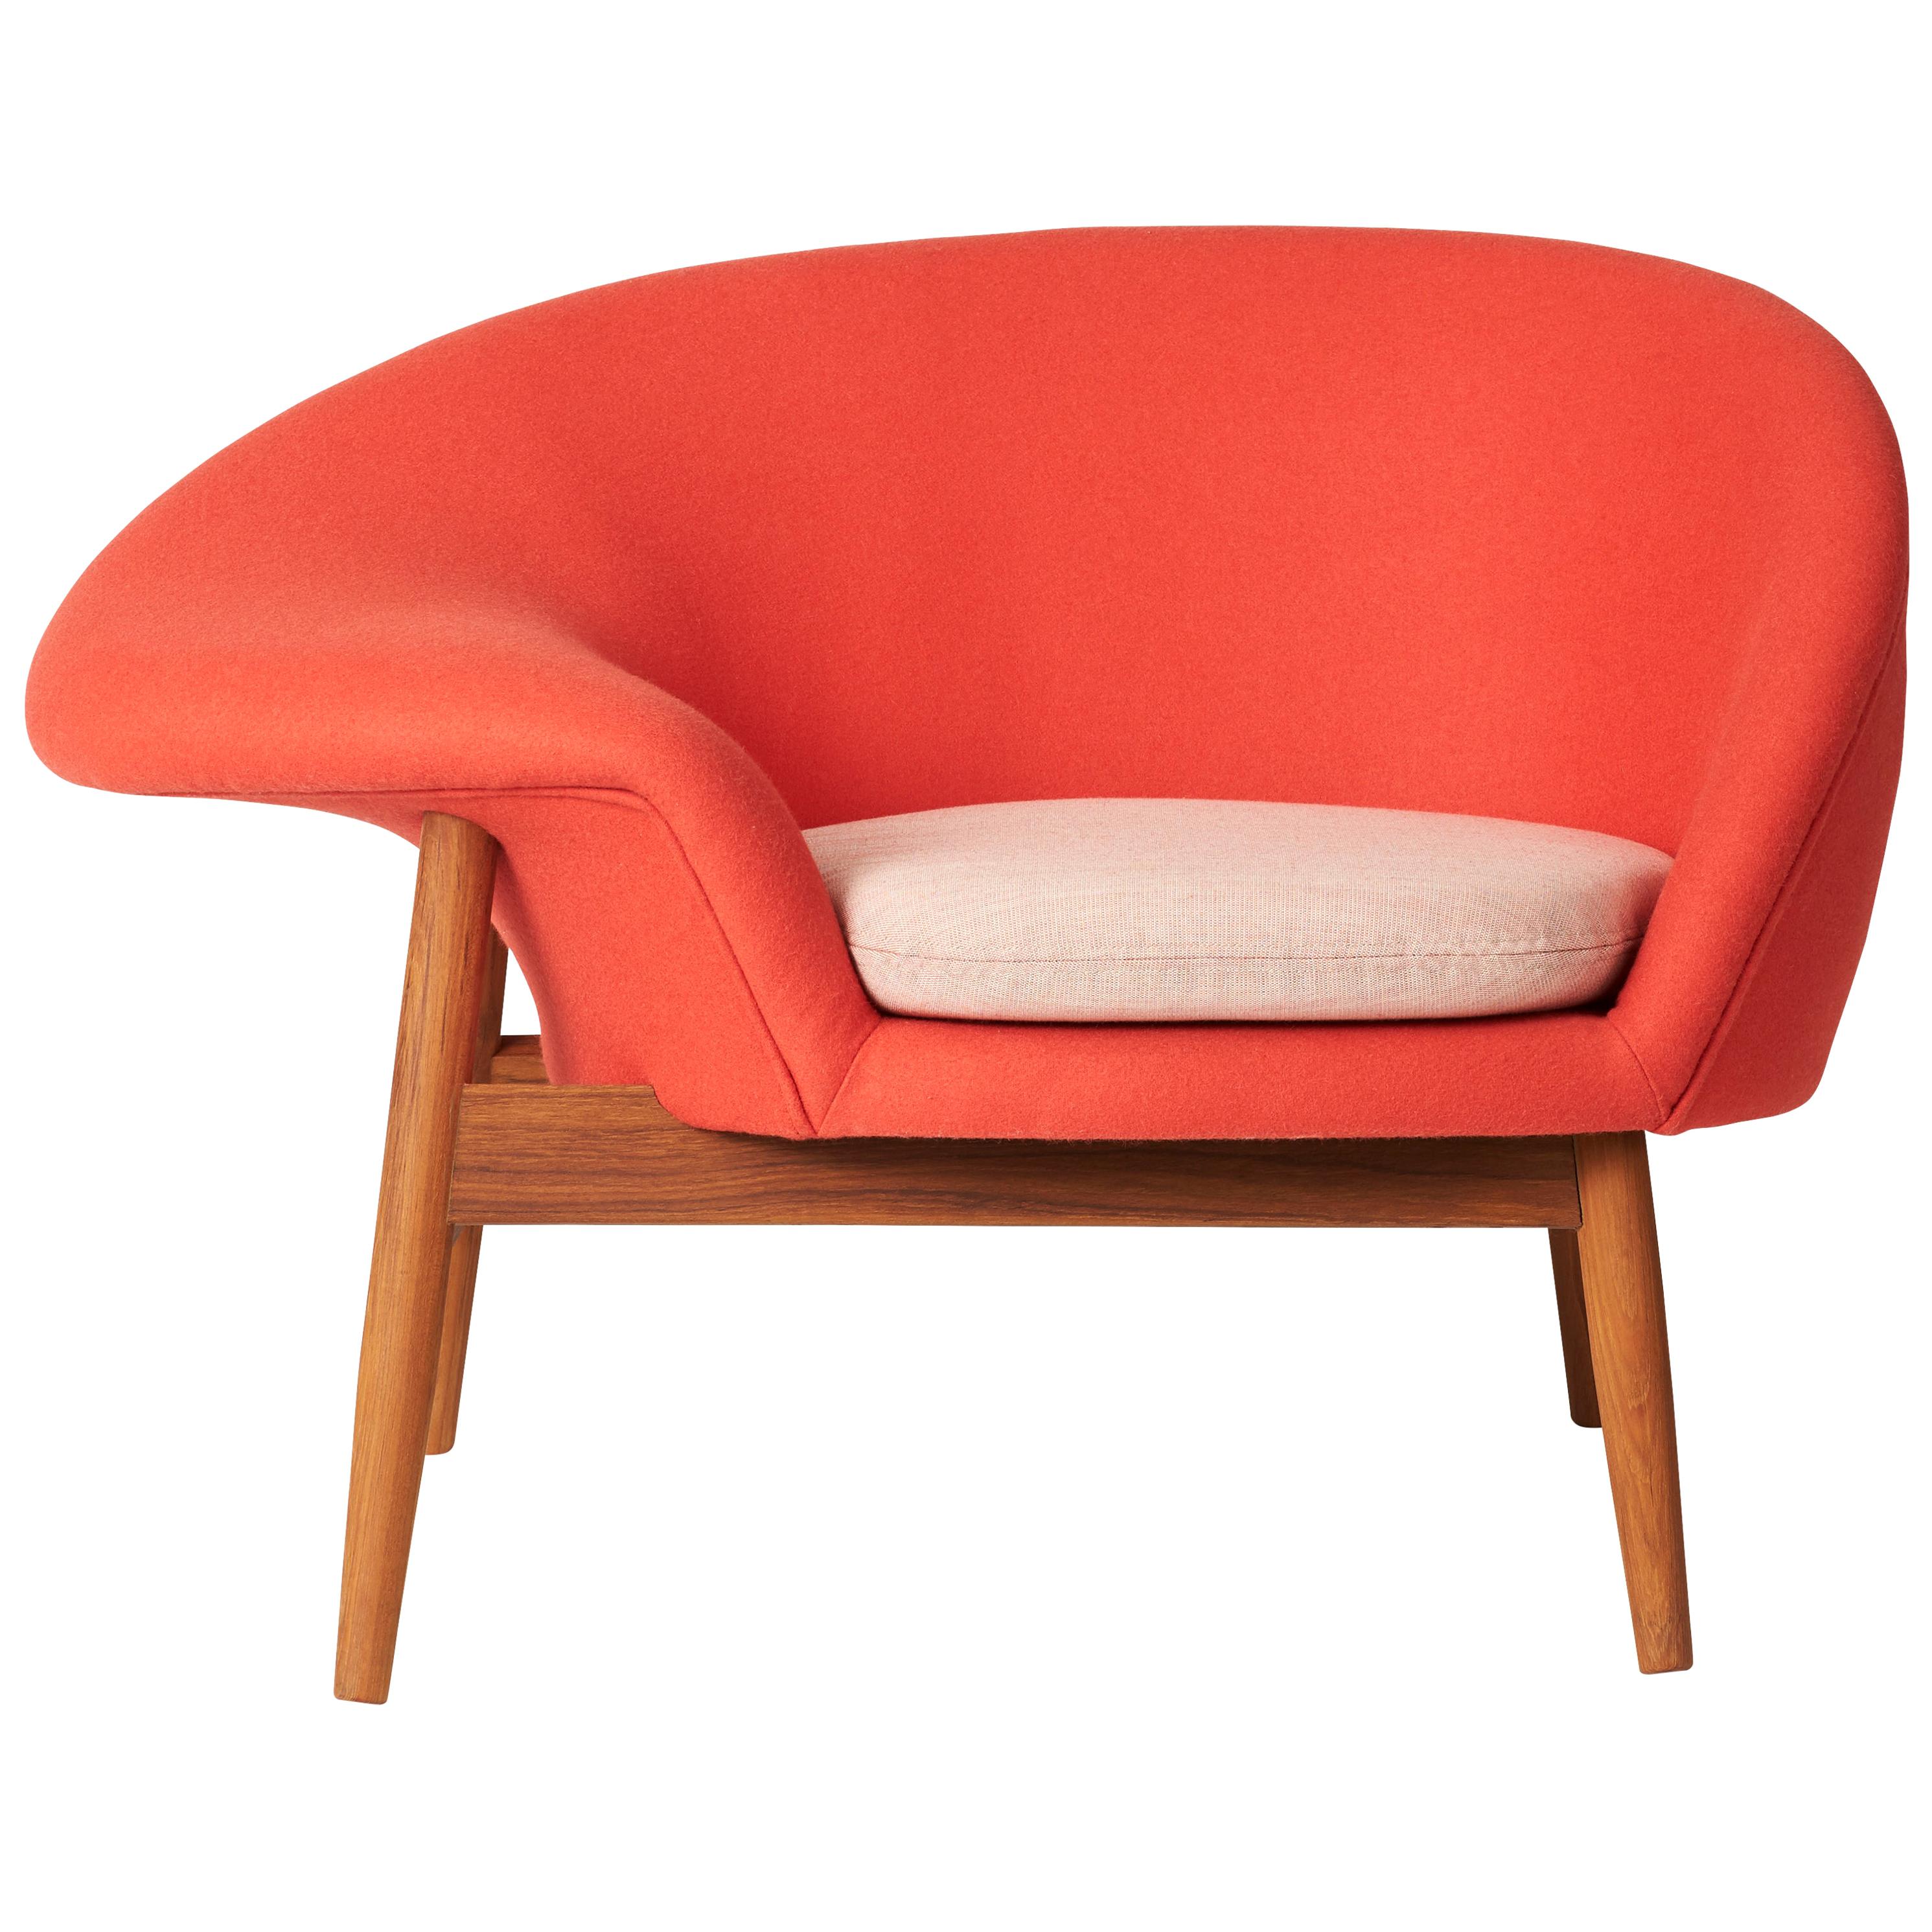 For Sale: Red (Hero 551, Canvas 614) Fried Egg Two-Tone Chair, by Hans Olsen from Warm Nordic